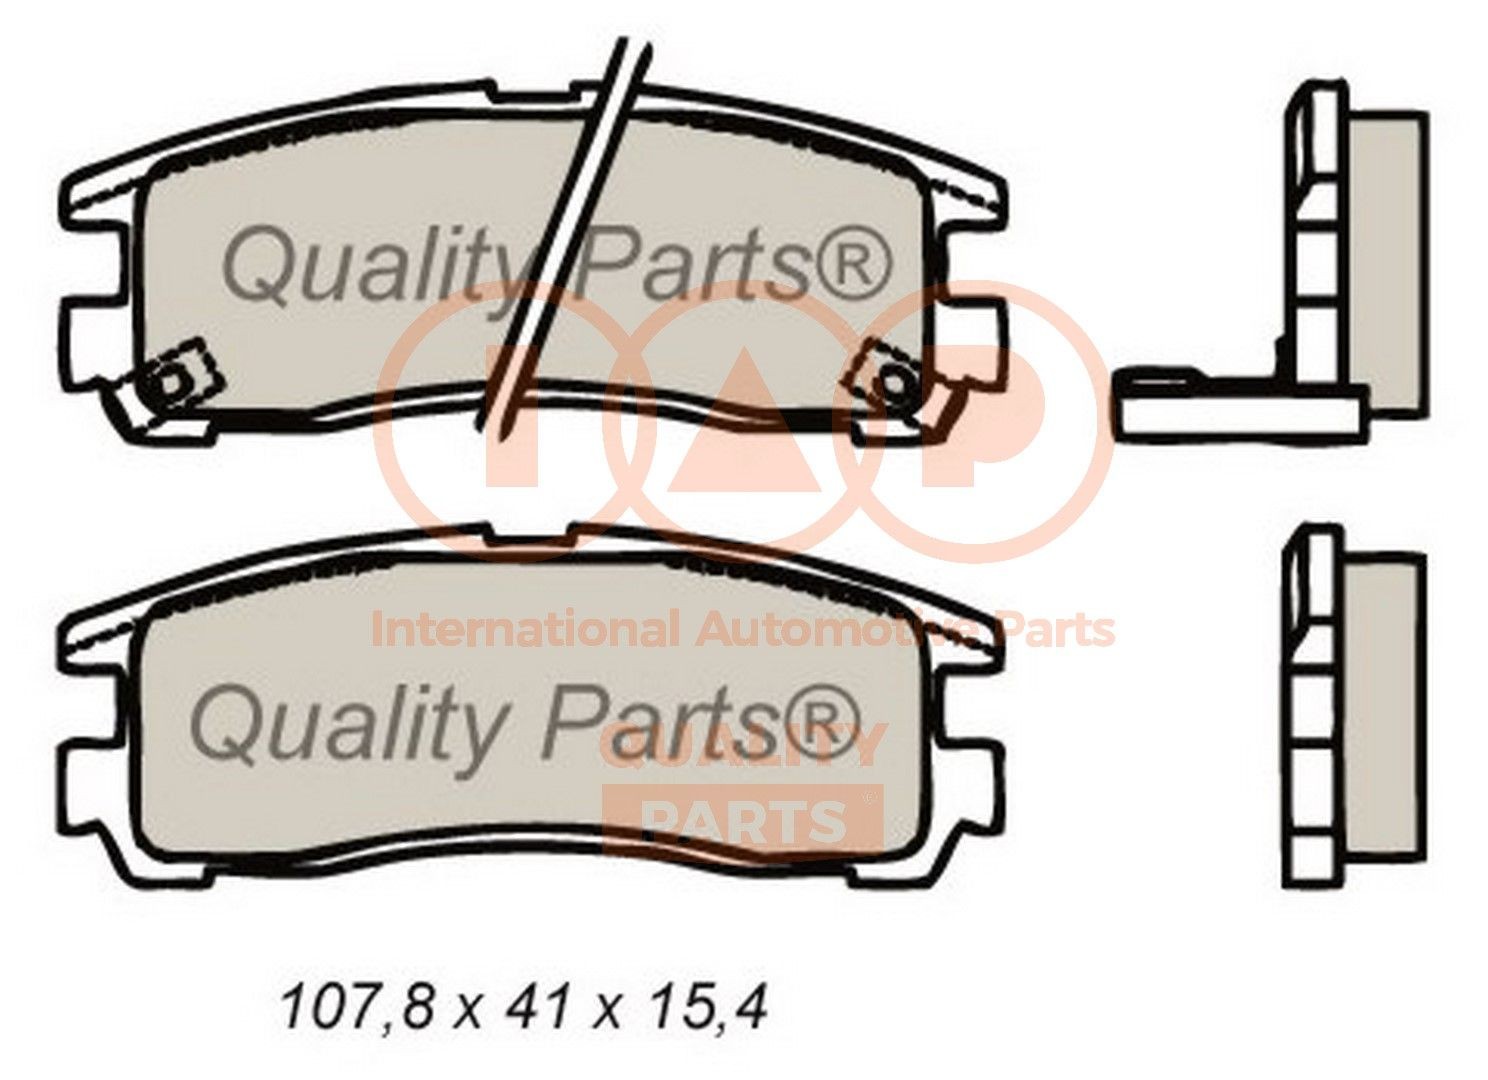 IAP QUALITY PARTS Rear Axle Height 1: 41mm, Width 1: 107,8mm, Thickness 1: 15,4mm Brake pads 704-12053 buy